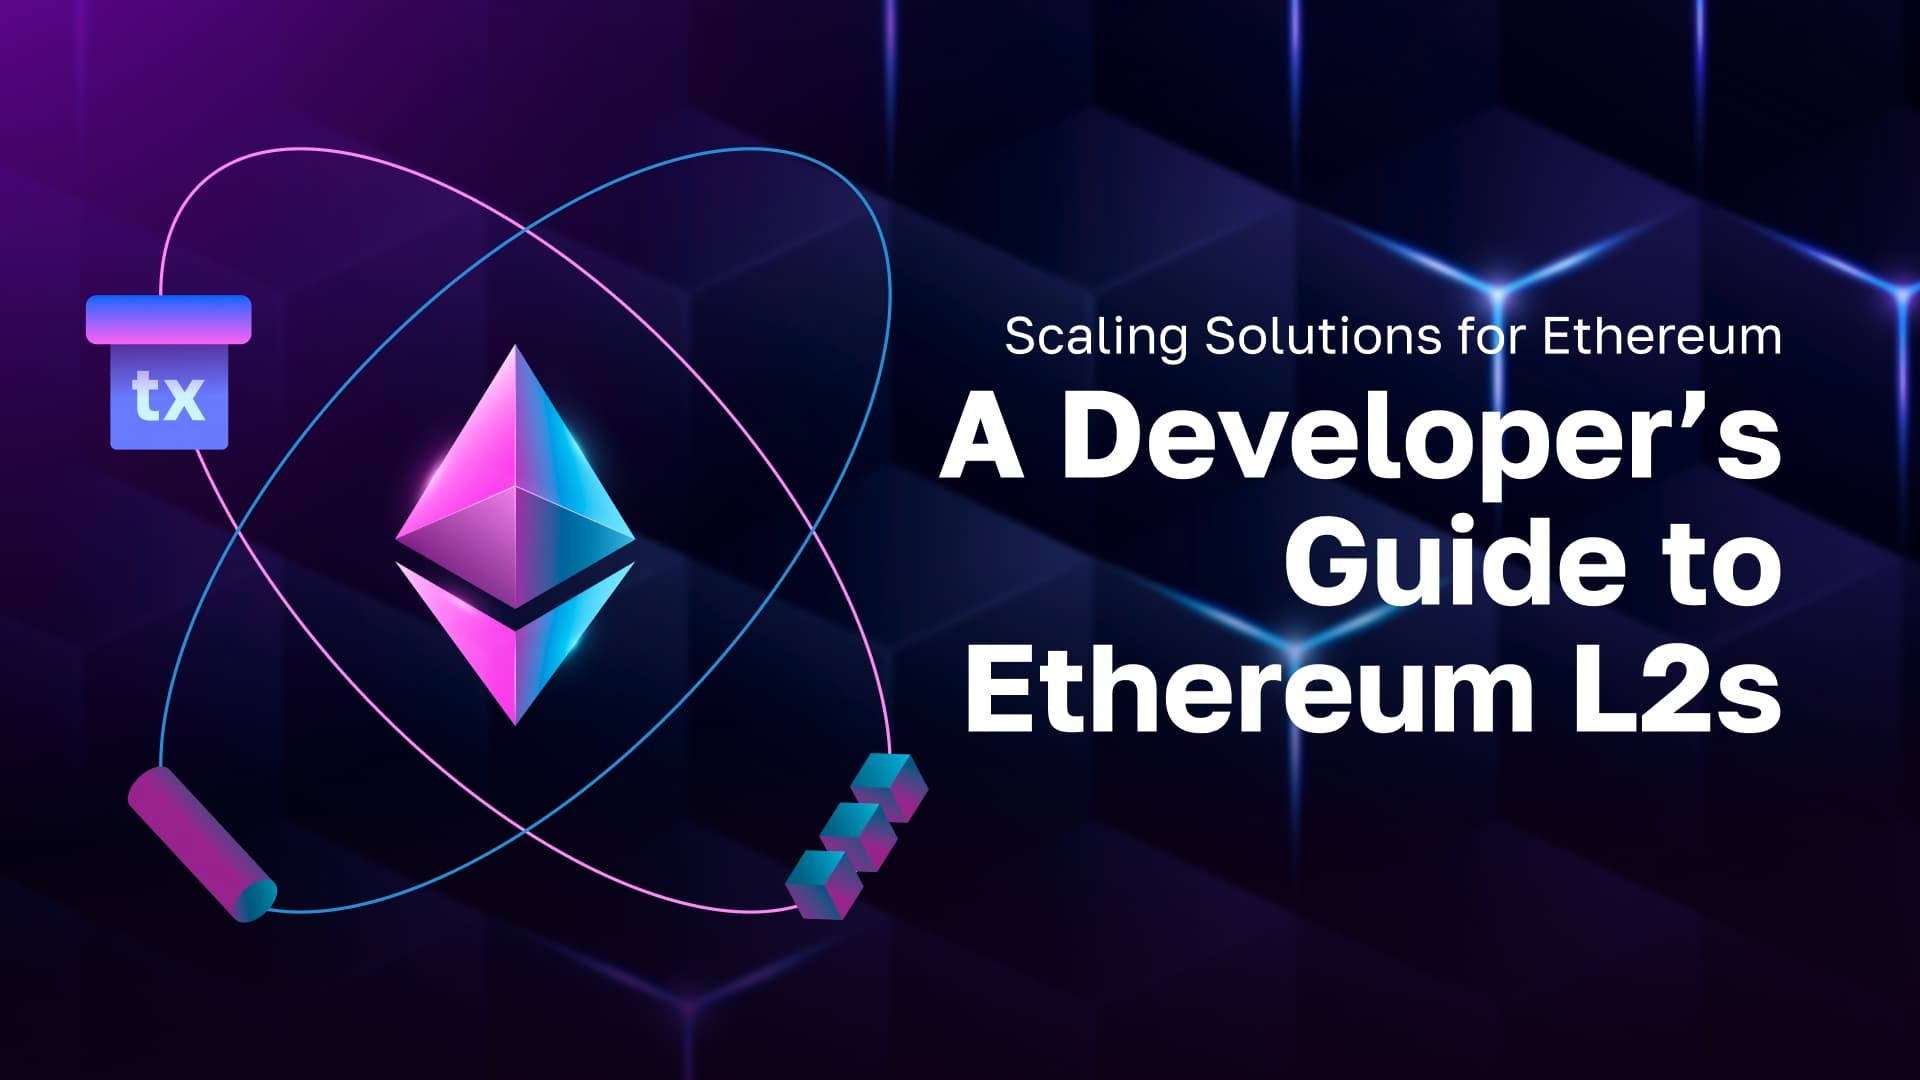 Scaling Solutions for Ethereum - A Developer’s Guide to Ethereum L2s